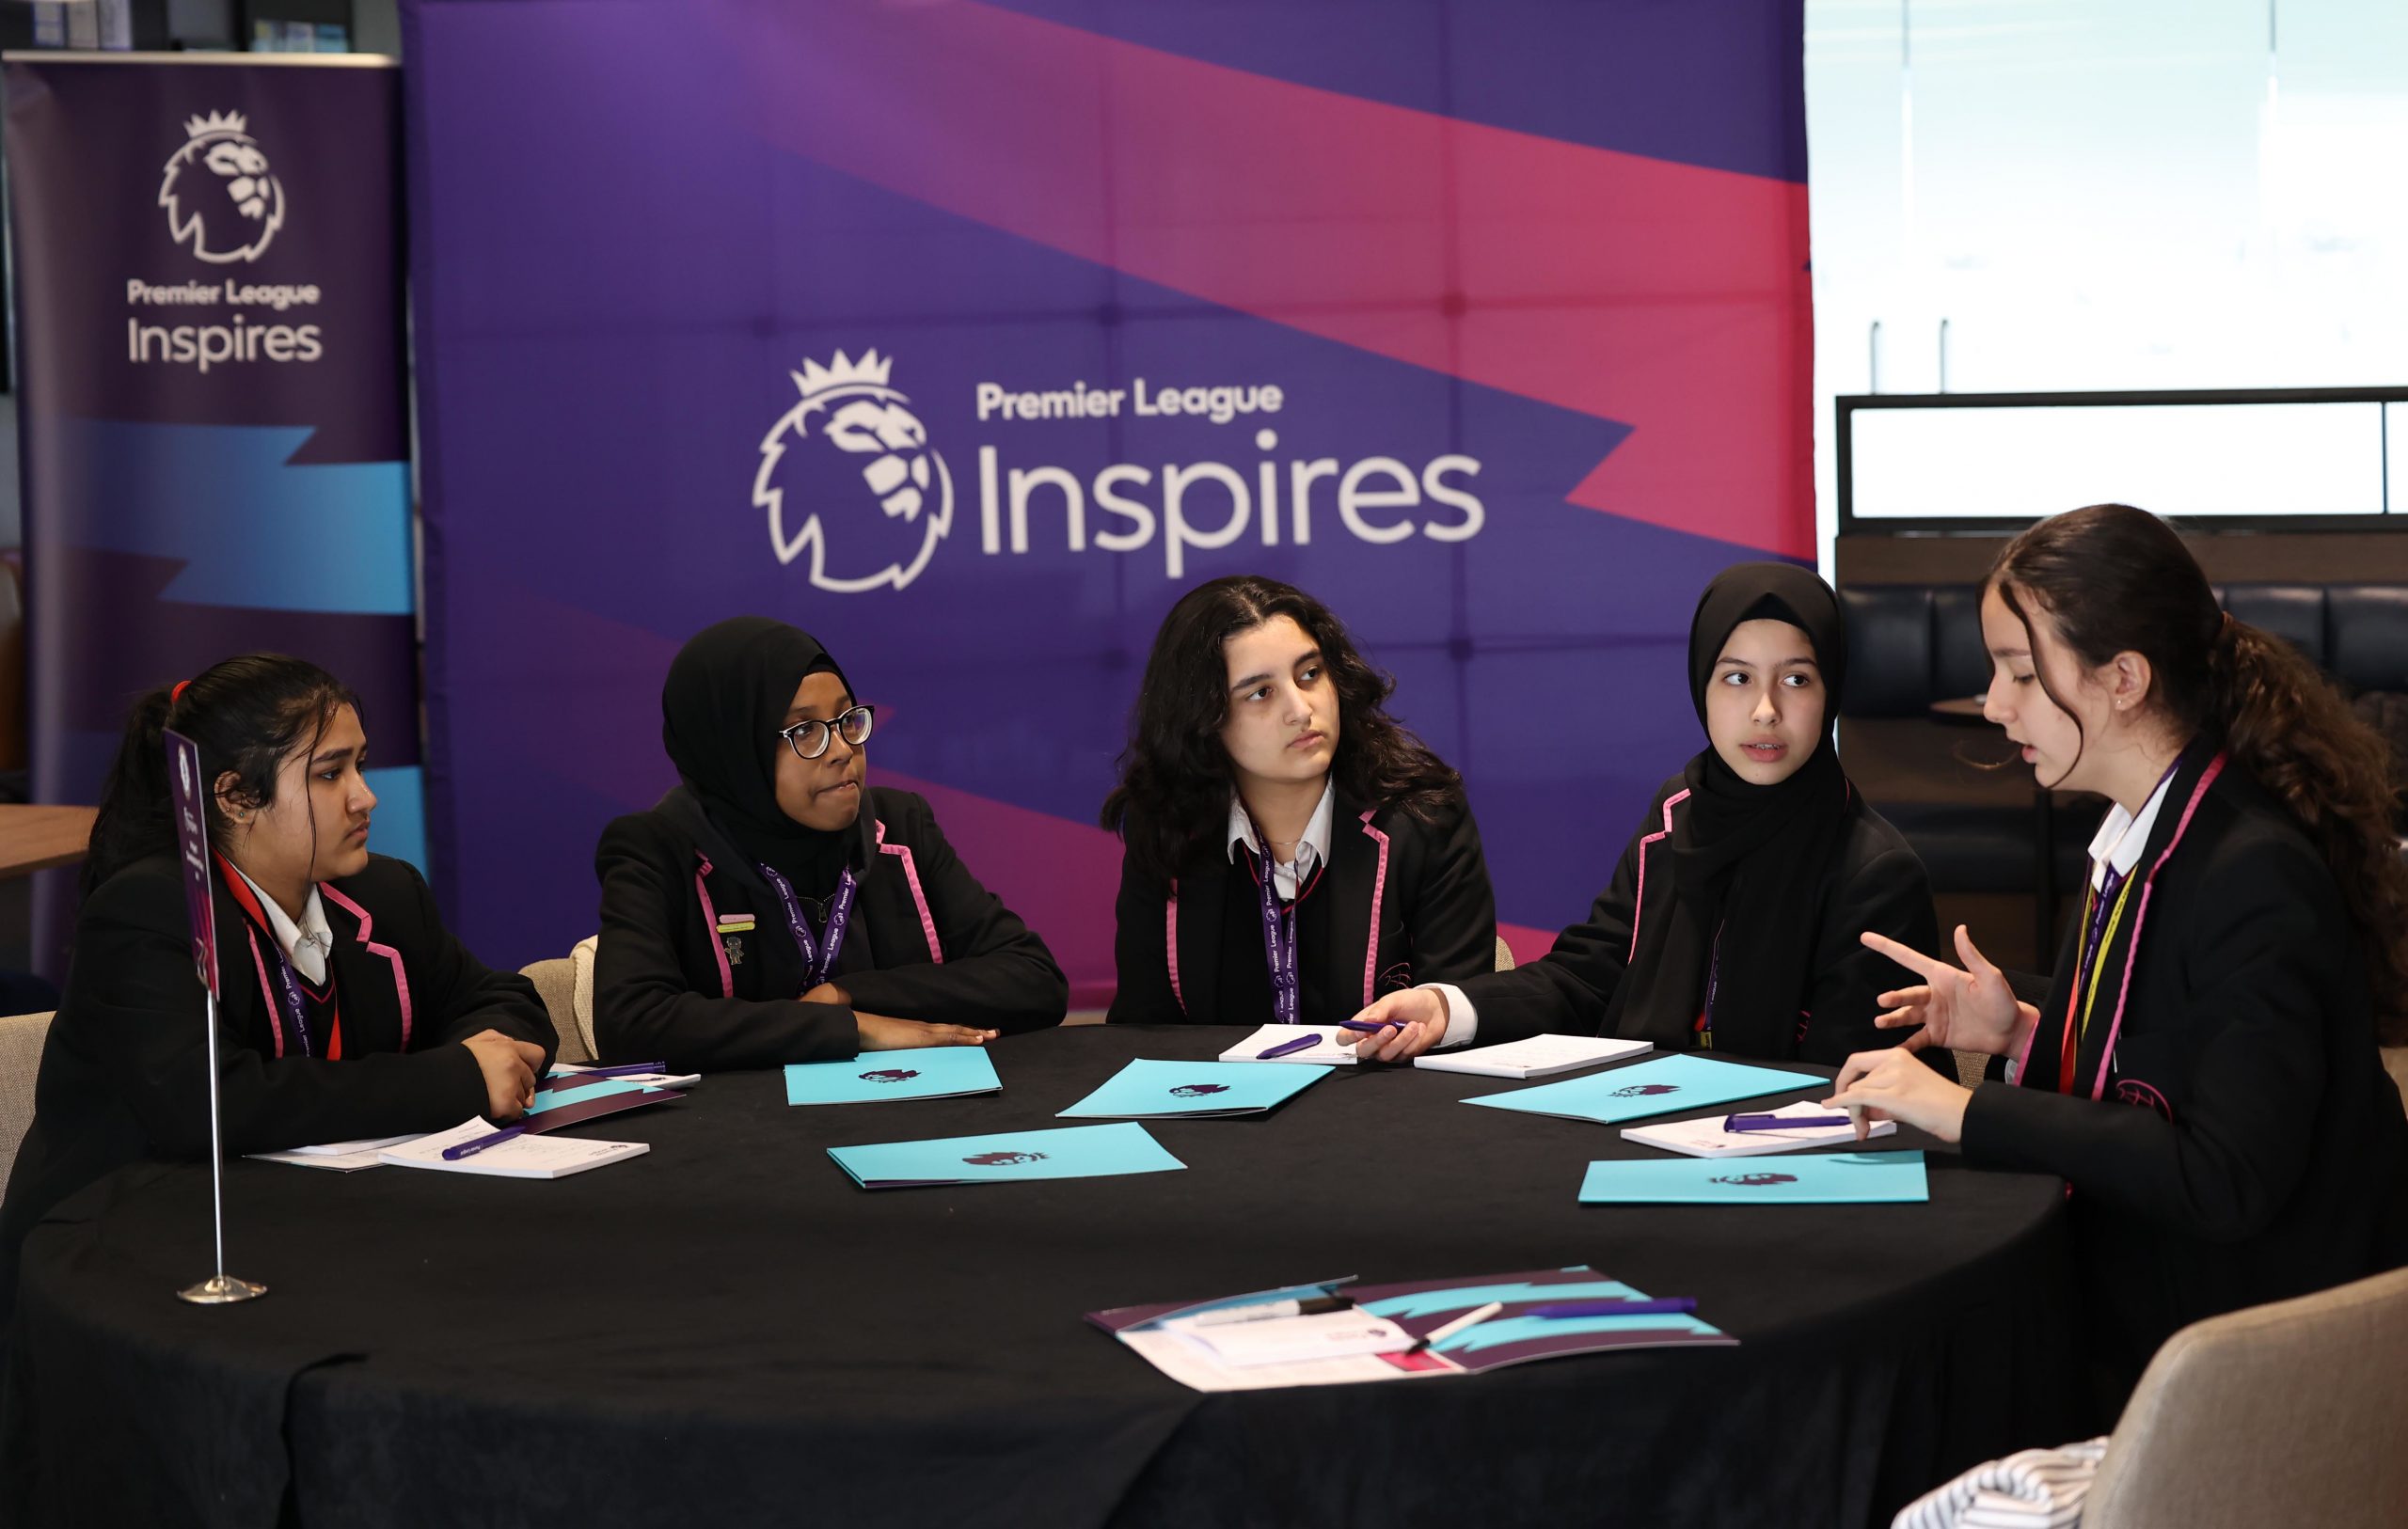 Premier League Inspires celebrates four years of improving young peoples’ lives